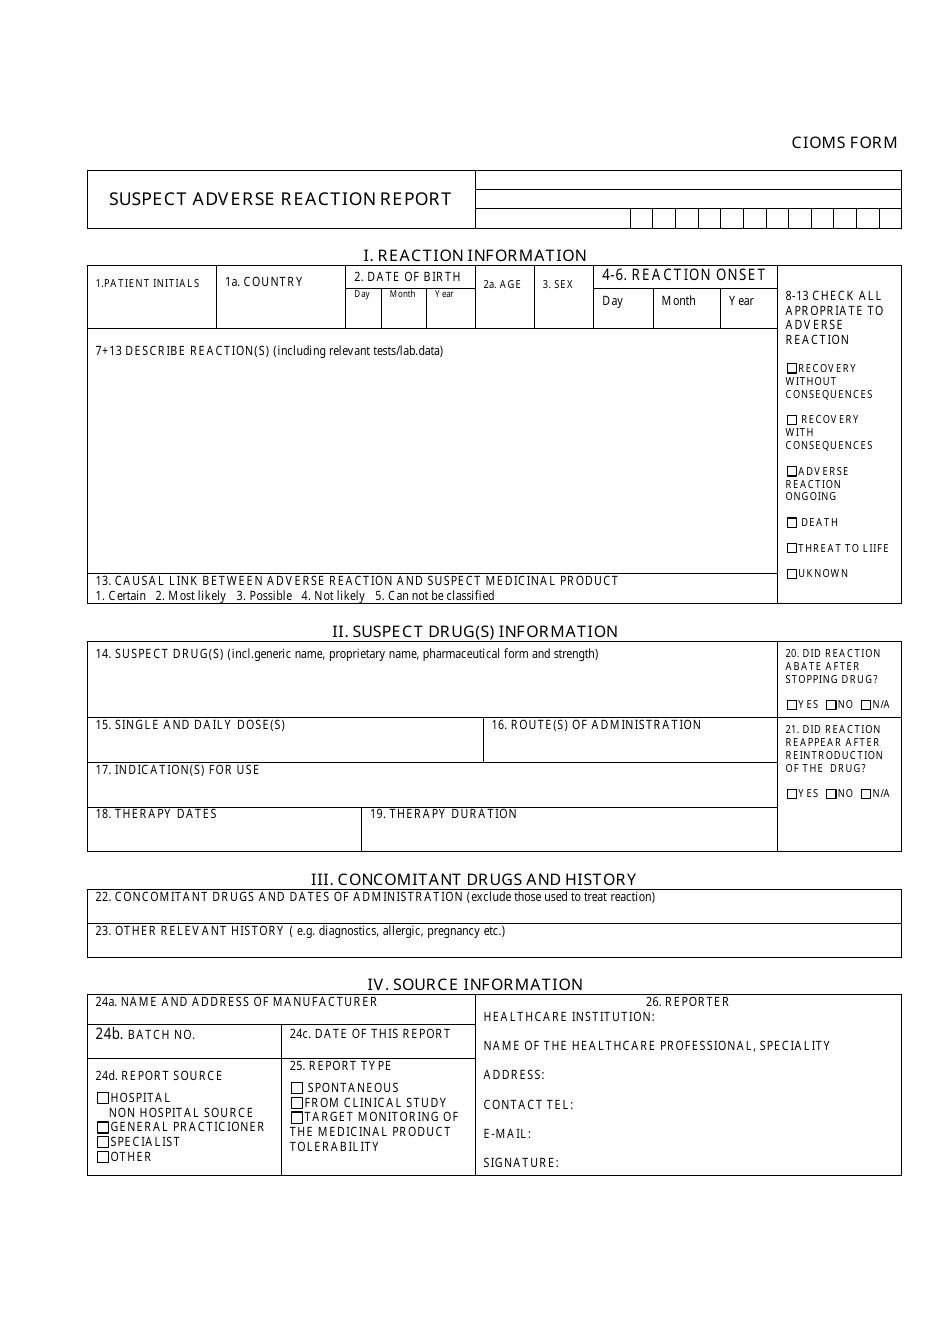 Cioms Form - Suspect Adverse Reaction Report Form - Council for International Organizations of Medical Sciences, Page 1